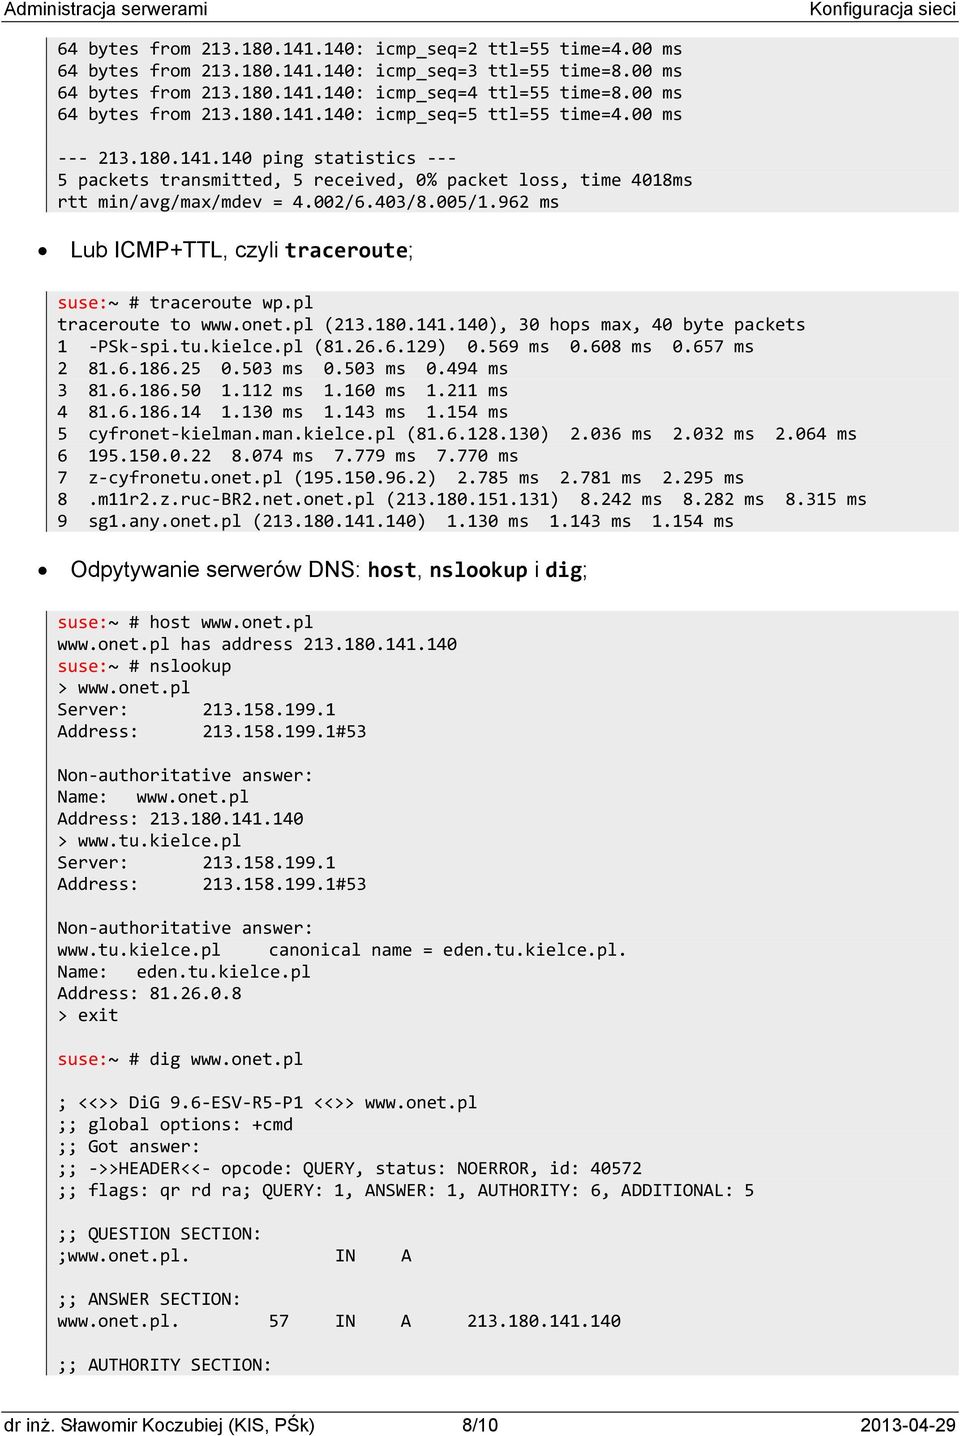 005/1.962 ms Lub ICMP+TTL, czyli traceroute; suse:~ # traceroute wp.pl traceroute to www.onet.pl (213.180.141.140), 30 hops max, 40 byte packets 1 PSk spi.tu.kielce.pl (81.26.6.129) 0.569 ms 0.